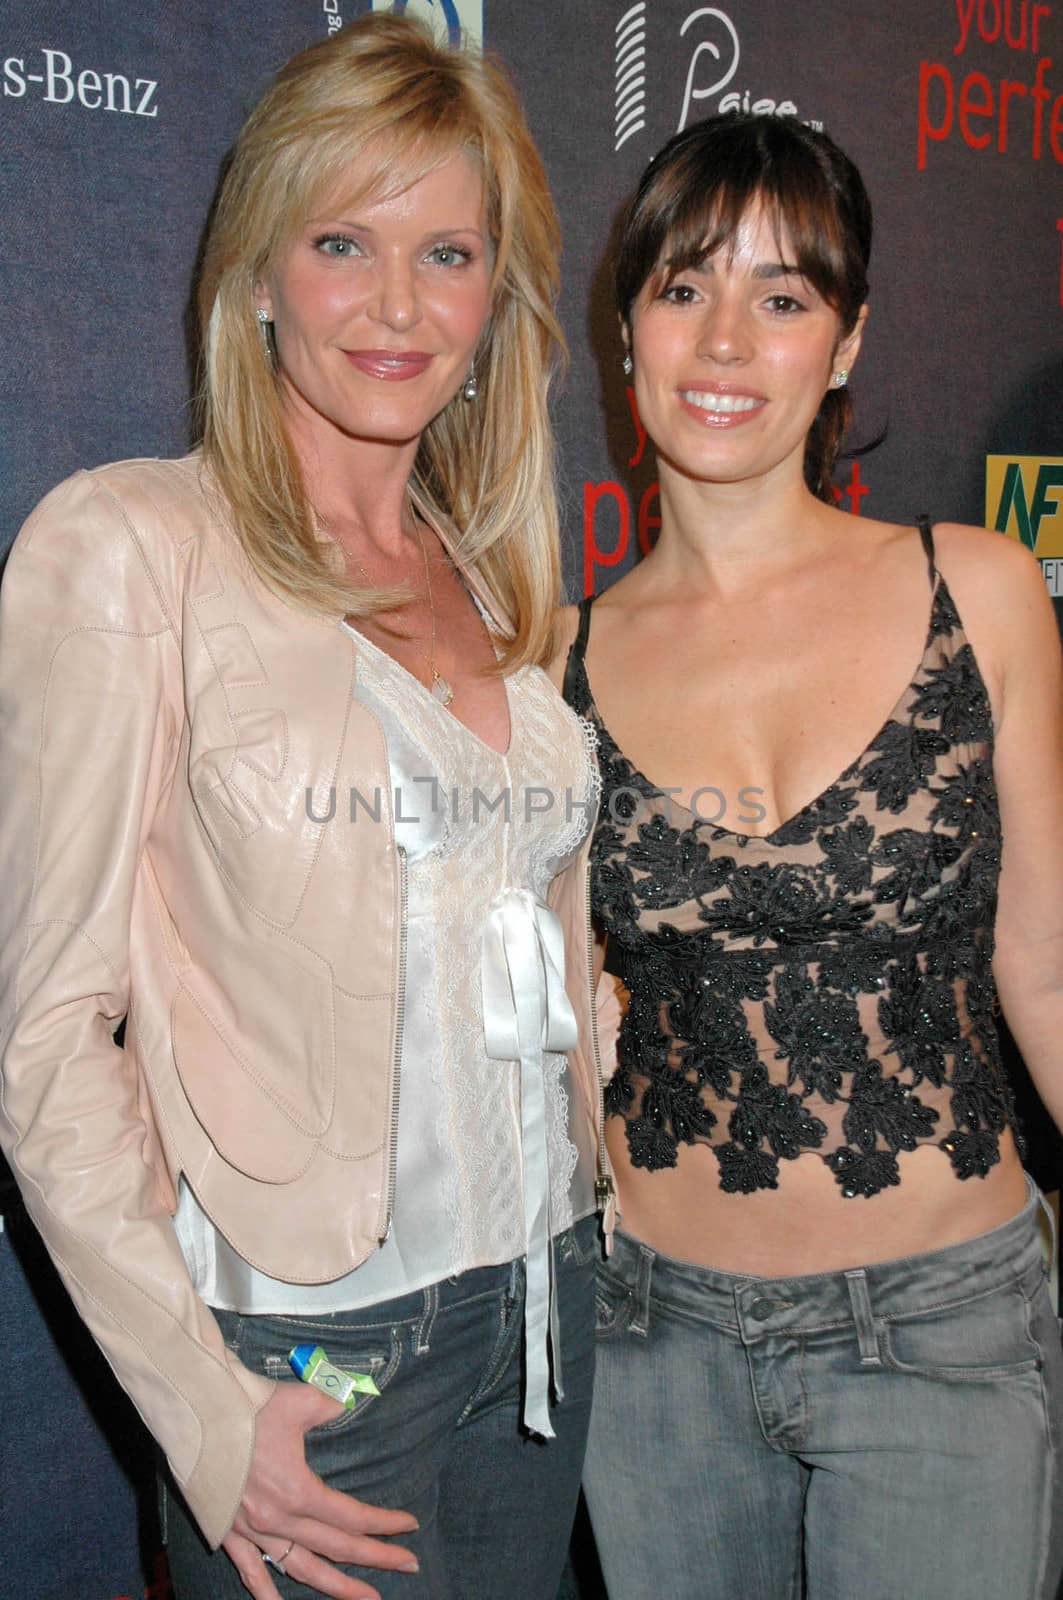 Paige Adams-Geller and Ana Ortiz
/ImageCollect by ImageCollect